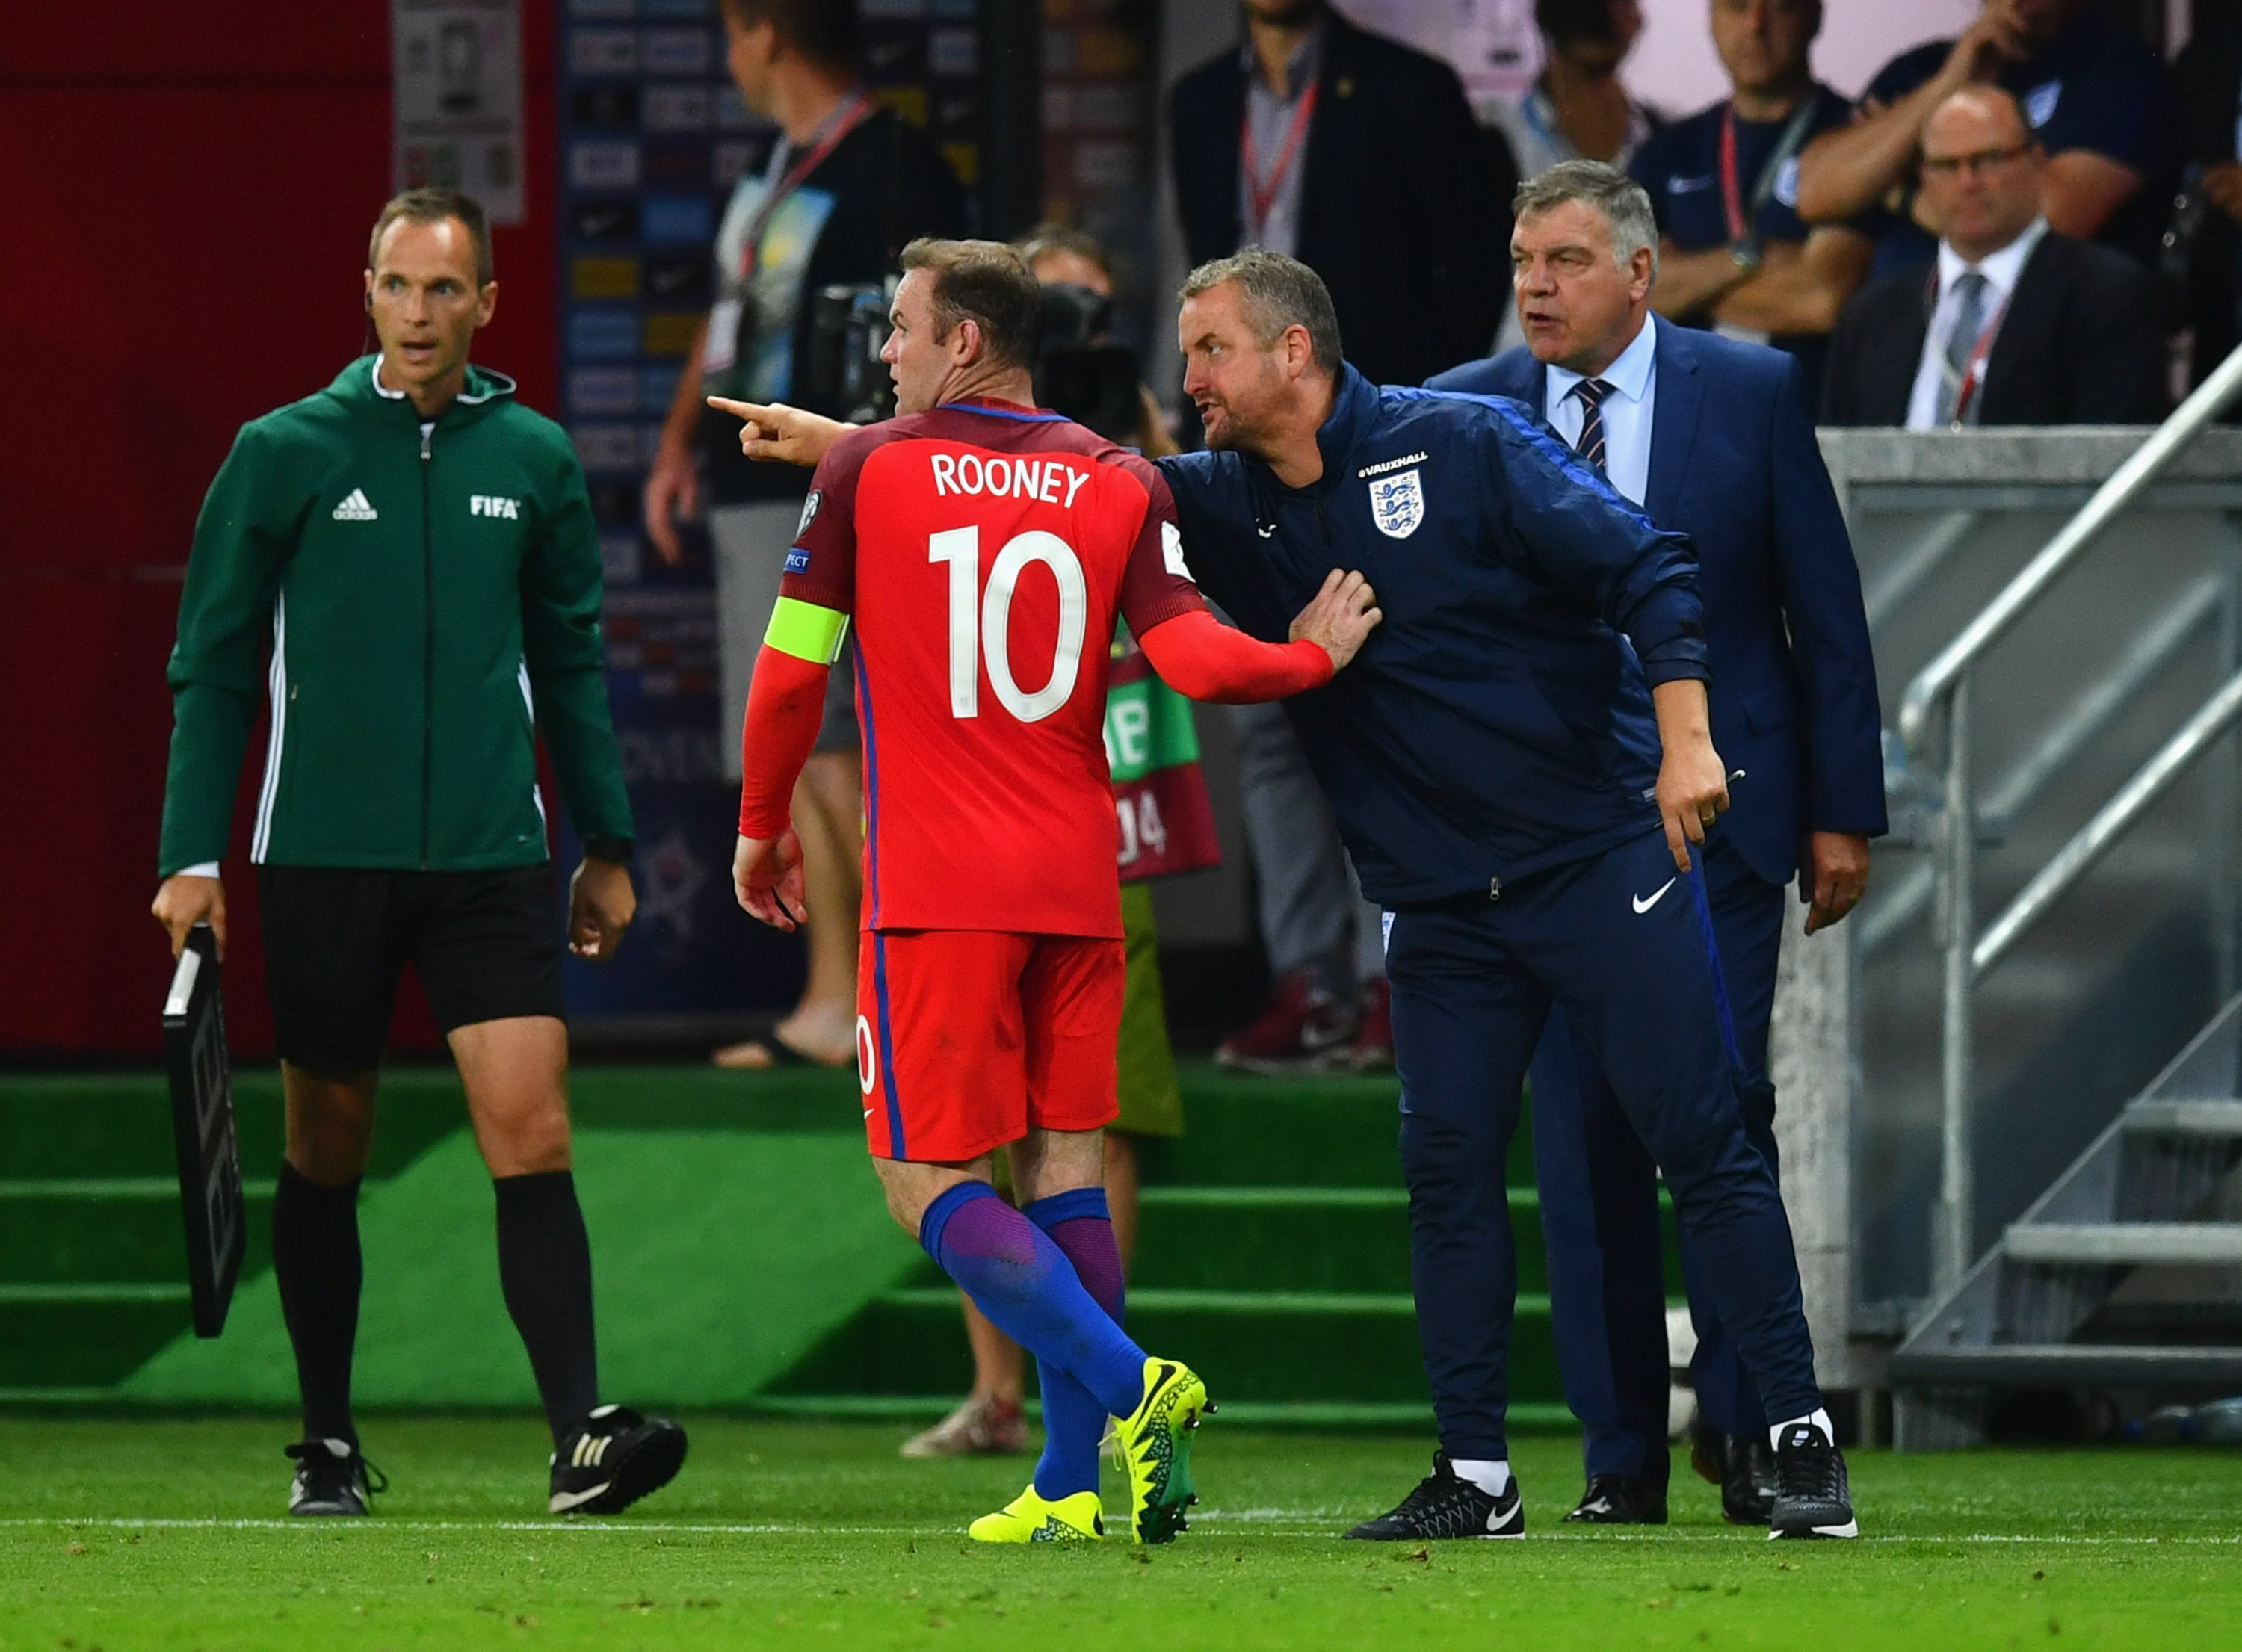 TRNAVA, SLOVAKIA - SEPTEMBER 04:  Martyn Margetson goalkeeping coach of England and Sam Allardyce manager of England give instructions to Wayne Rooney of England during the 2018 FIFA World Cup Group F qualifying match between Slovakia and England at City Arena on September 4, 2016 in Trnava, Slovakia.  (Photo by Dan Mullan/Getty Images)